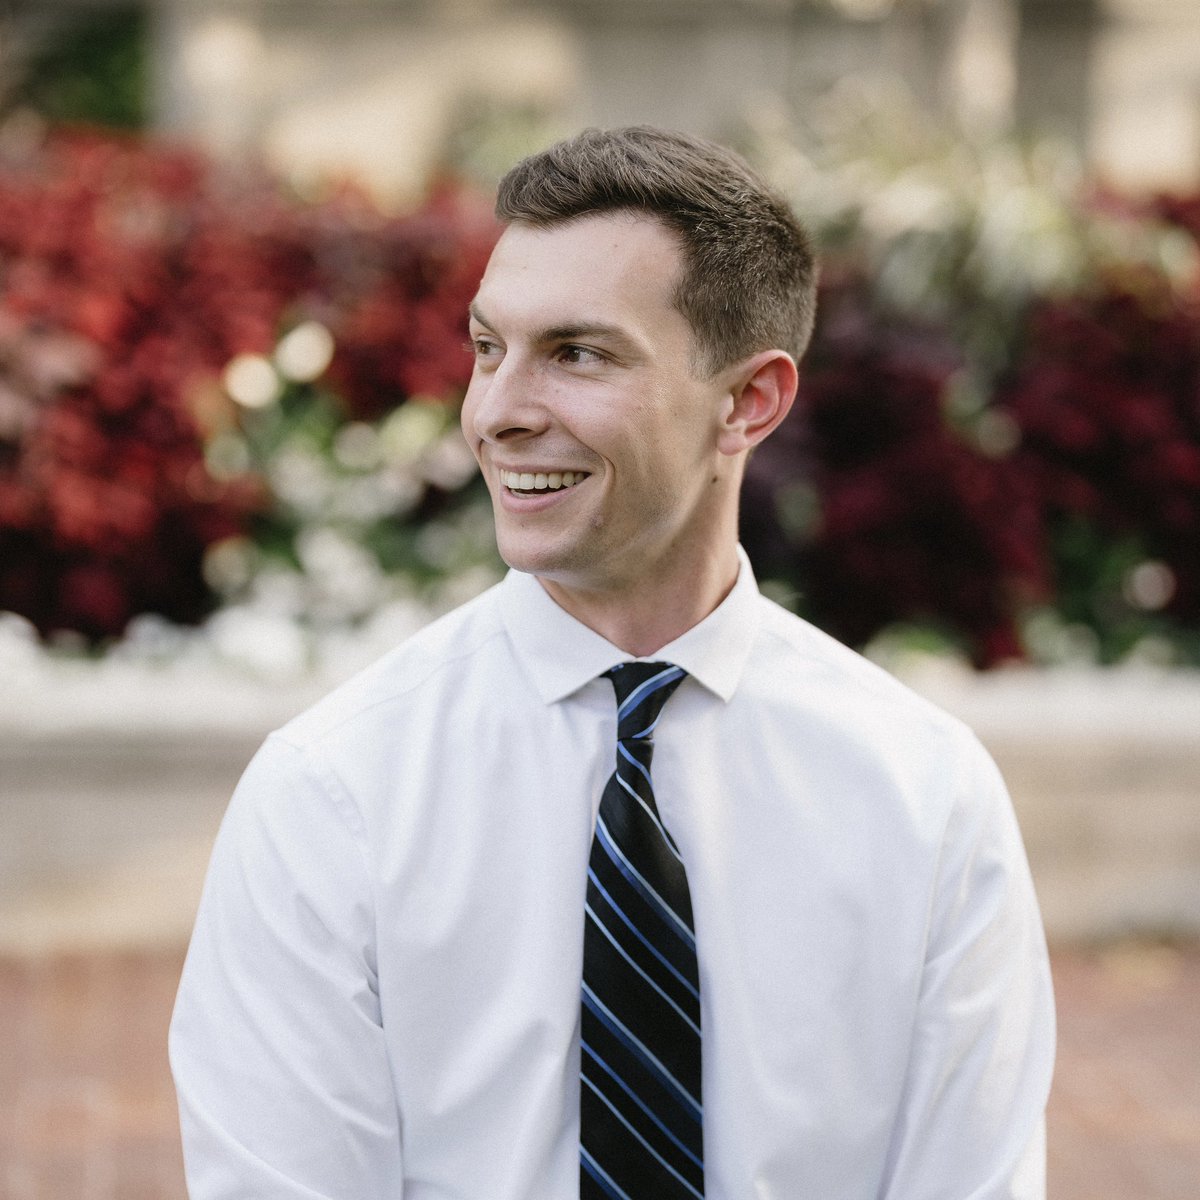 It’s job market season! I’m Austin Knies, an Economics Ph.D. Candidate at @IUBloomington on the 2023-24 job market. My work is in applied microeconomics at the intersection of health economics and information frictions. A quick 🧵 about me: